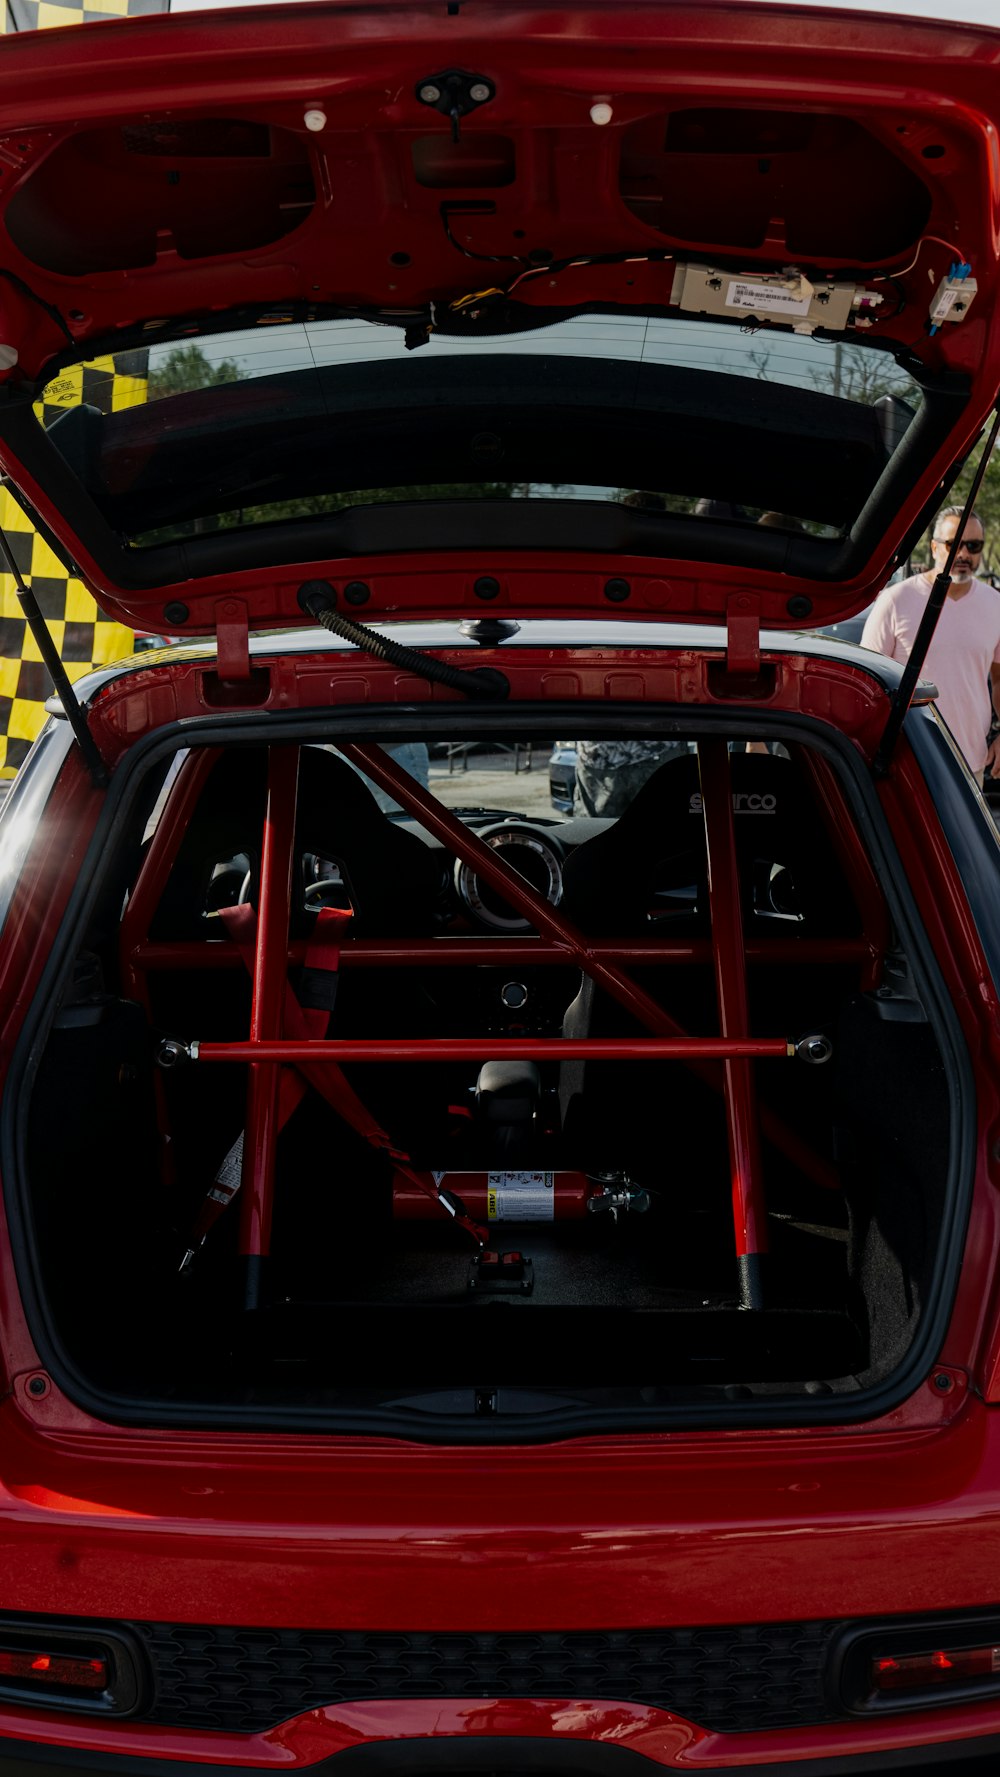 the trunk of a red car with its hood open